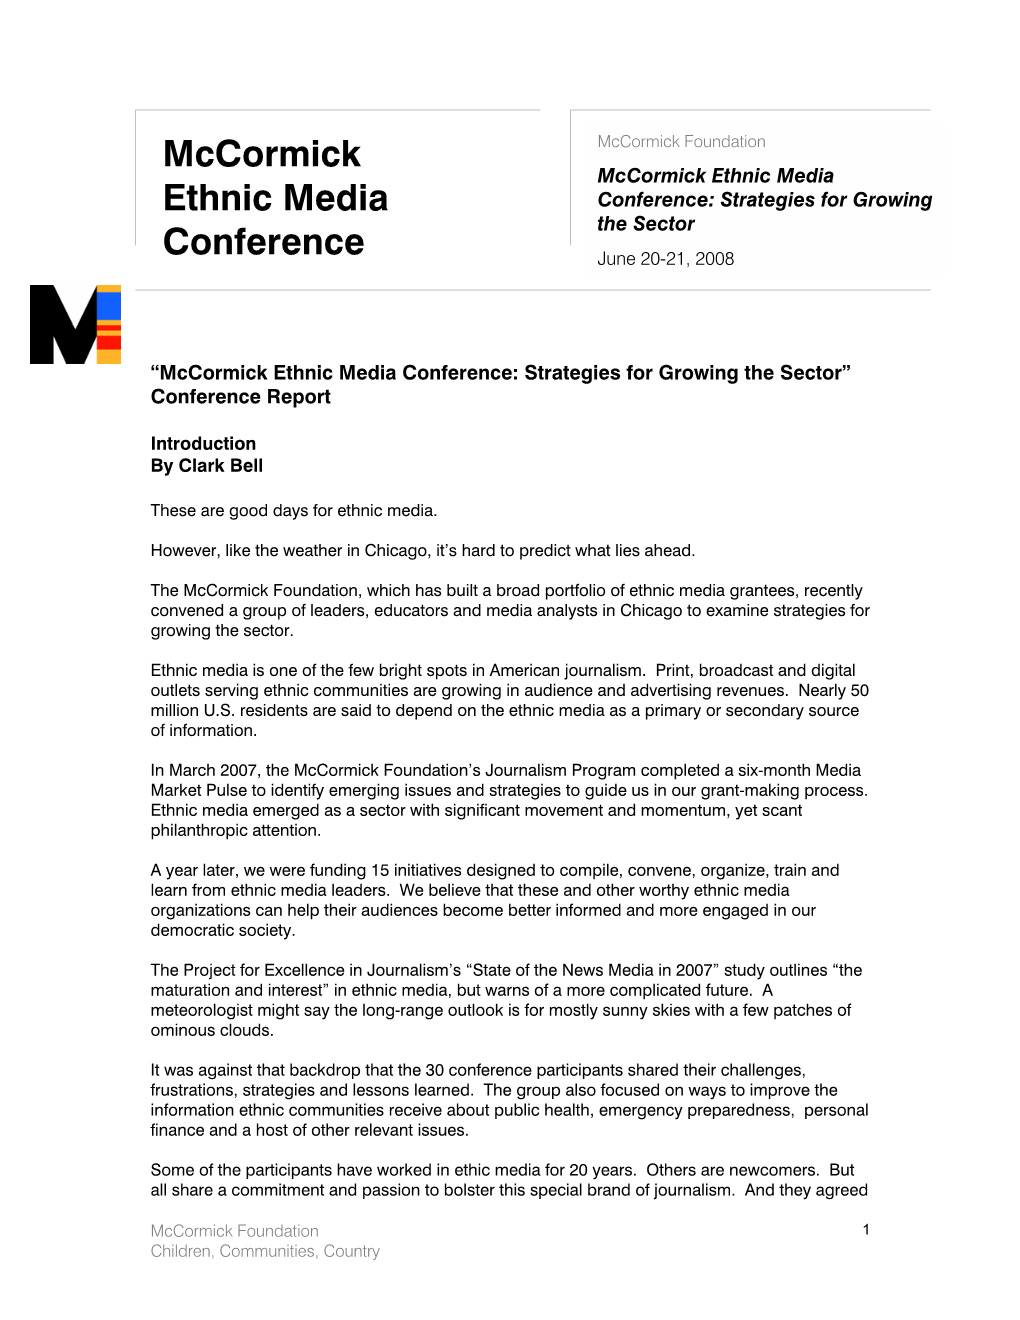 Mccormick Ethnic Media Conference: Strategies for Growing the Sector” Conference Report